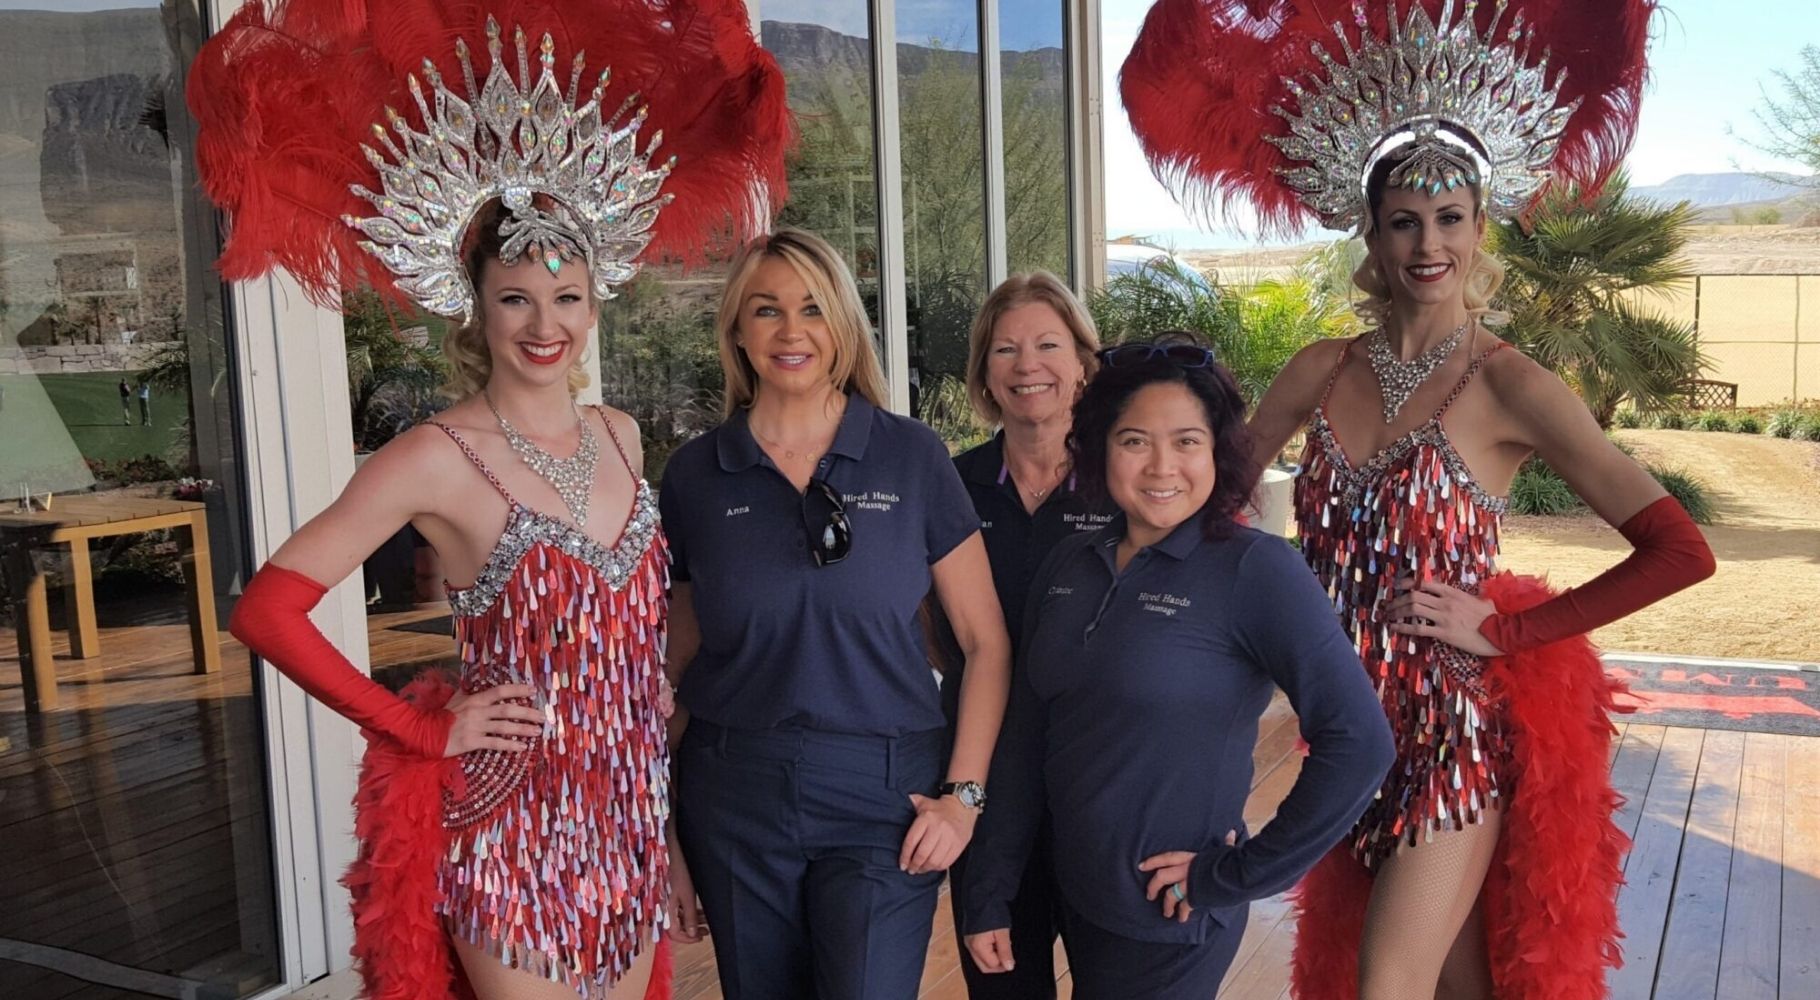 Vegas Chair massage staffers seen with Vegas show girls at a sports event in las Vegas, NV